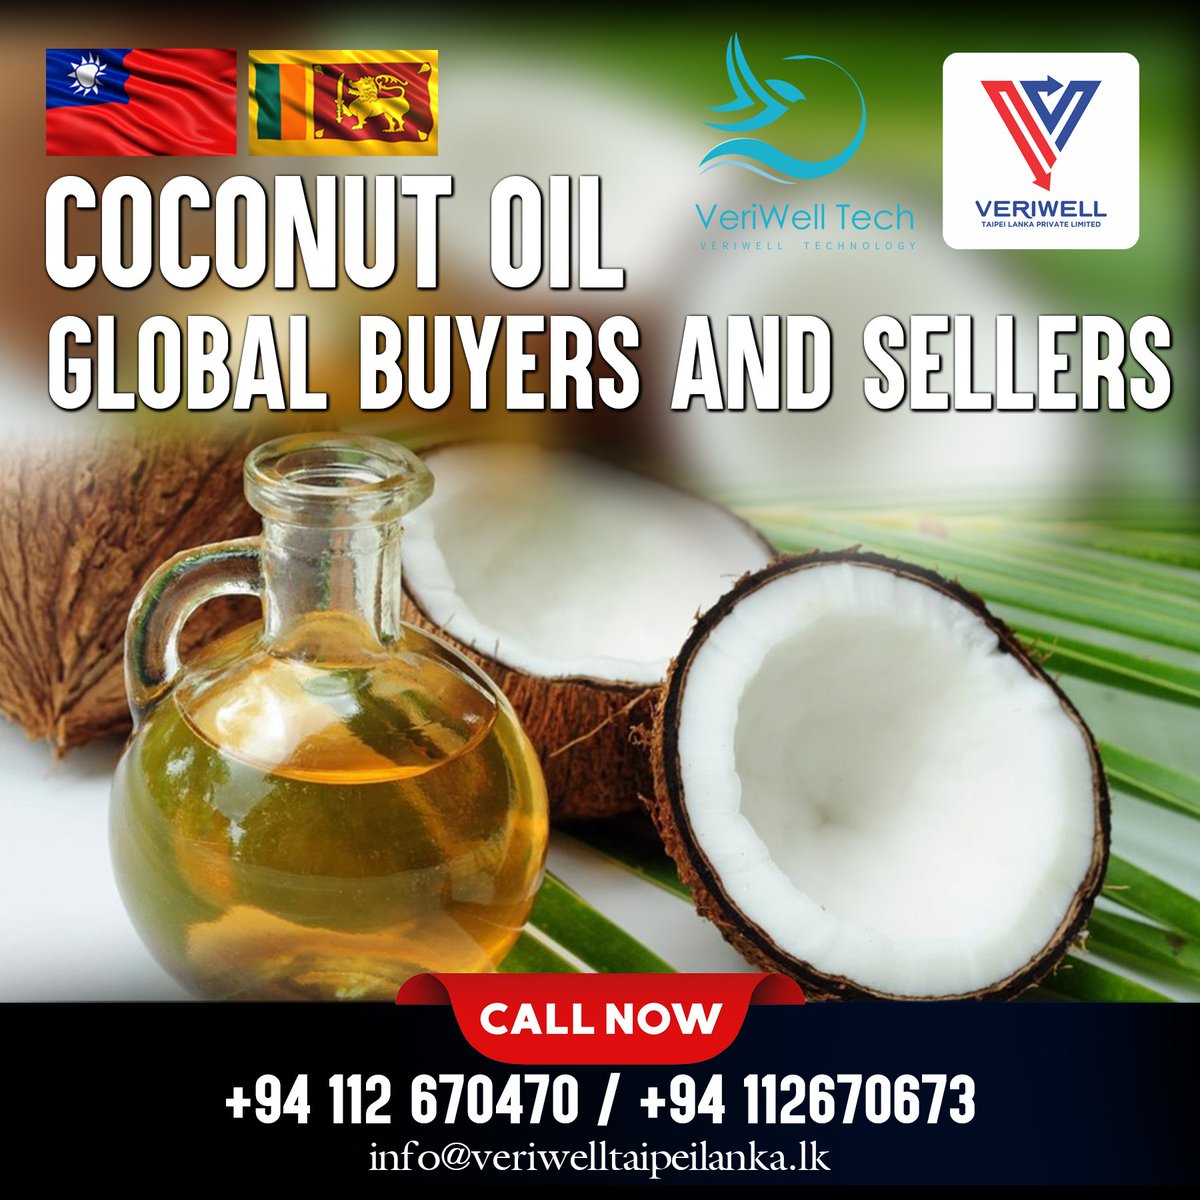 Super food for your soul

#coconutoil #natural #global #naturalcoconutoil #srilankanproducts #wholesaller #srilankabusiness #taipeibusiness #taipei